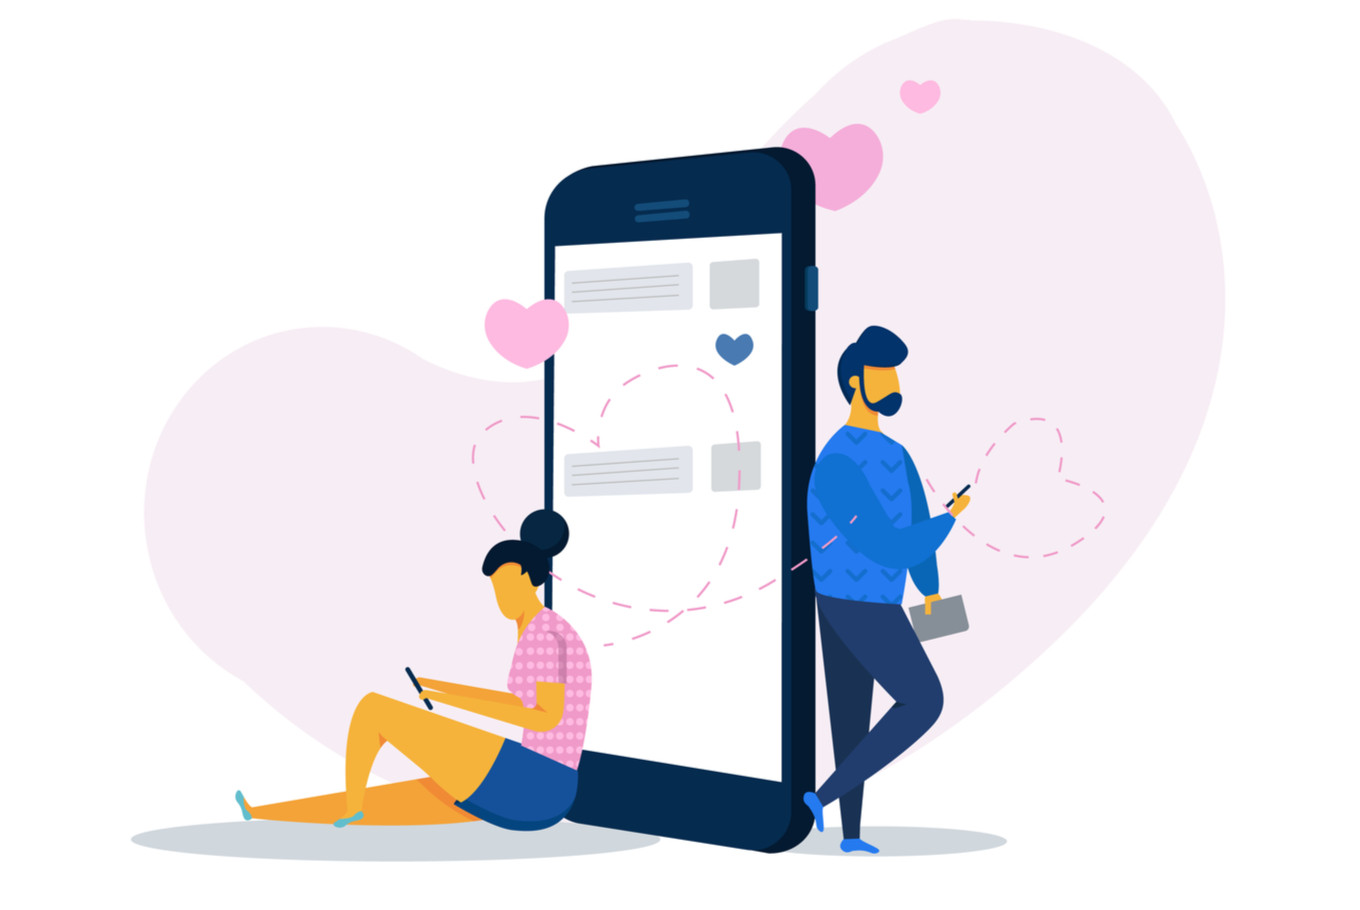 What is Online Dating?